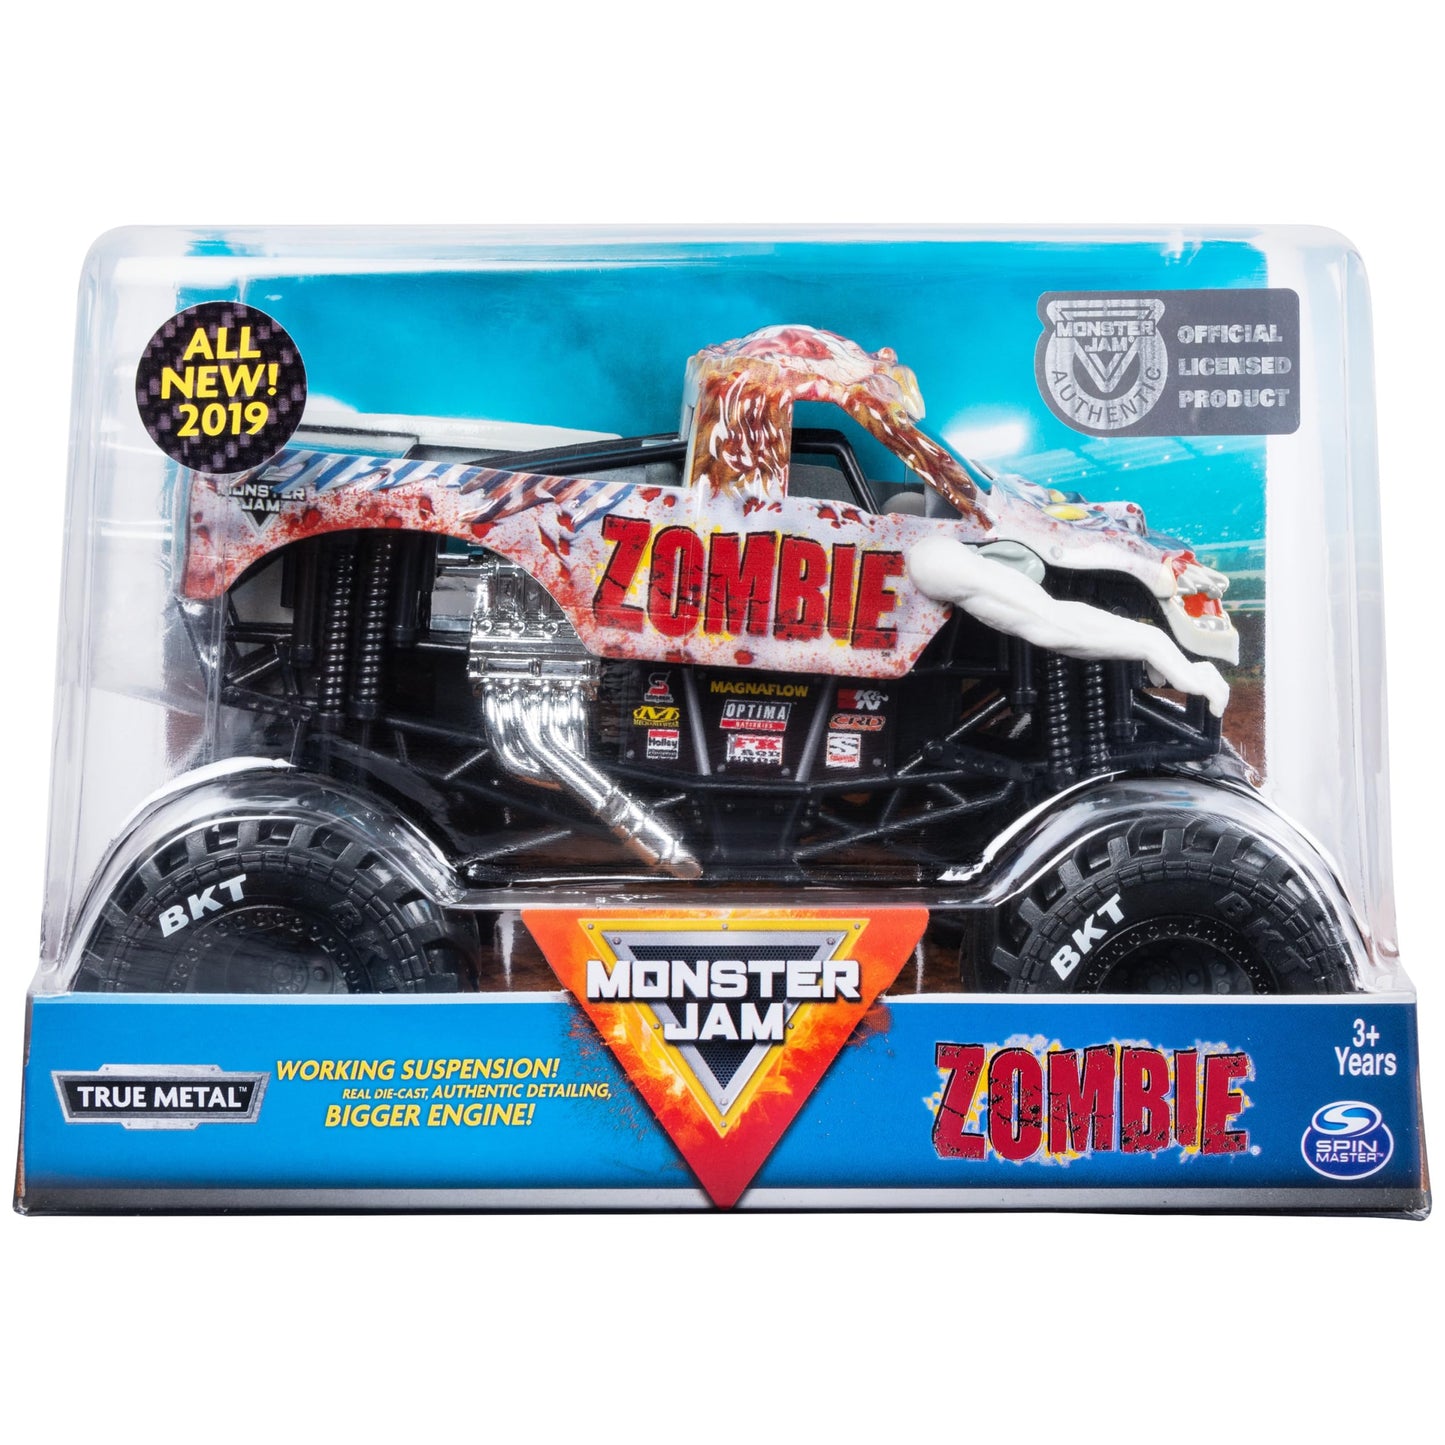 Monster Jam, Official Zombie Monster Truck, Collector Die-Cast Vehicle, 1:24 Scale, Kids Toys for Boys and Girls Ages 3 and up